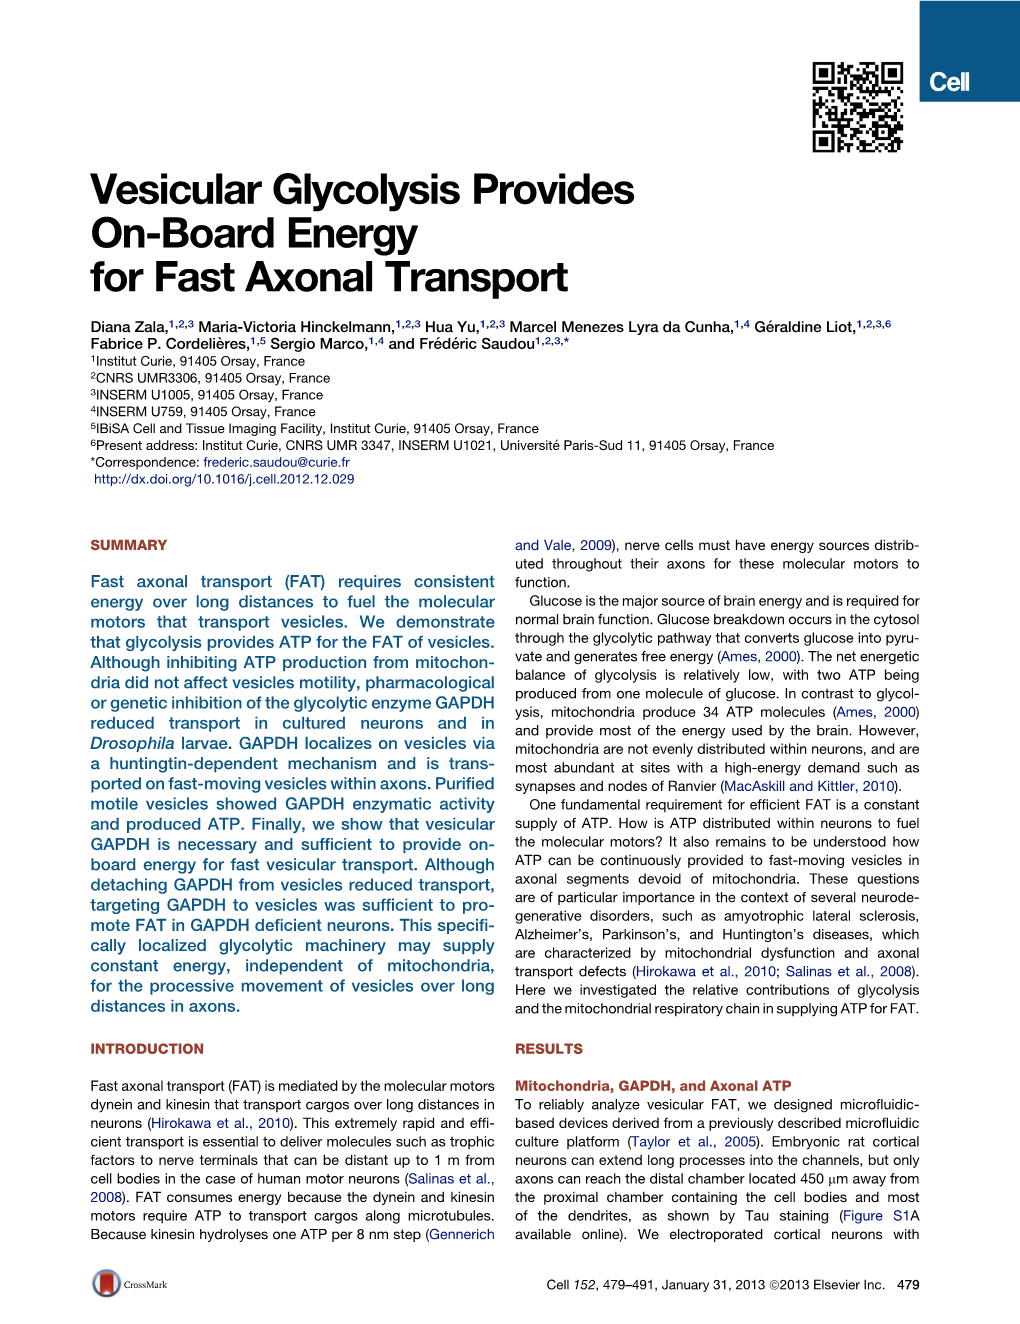 Vesicular Glycolysis Provides On-Board Energy for Fast Axonal Transport